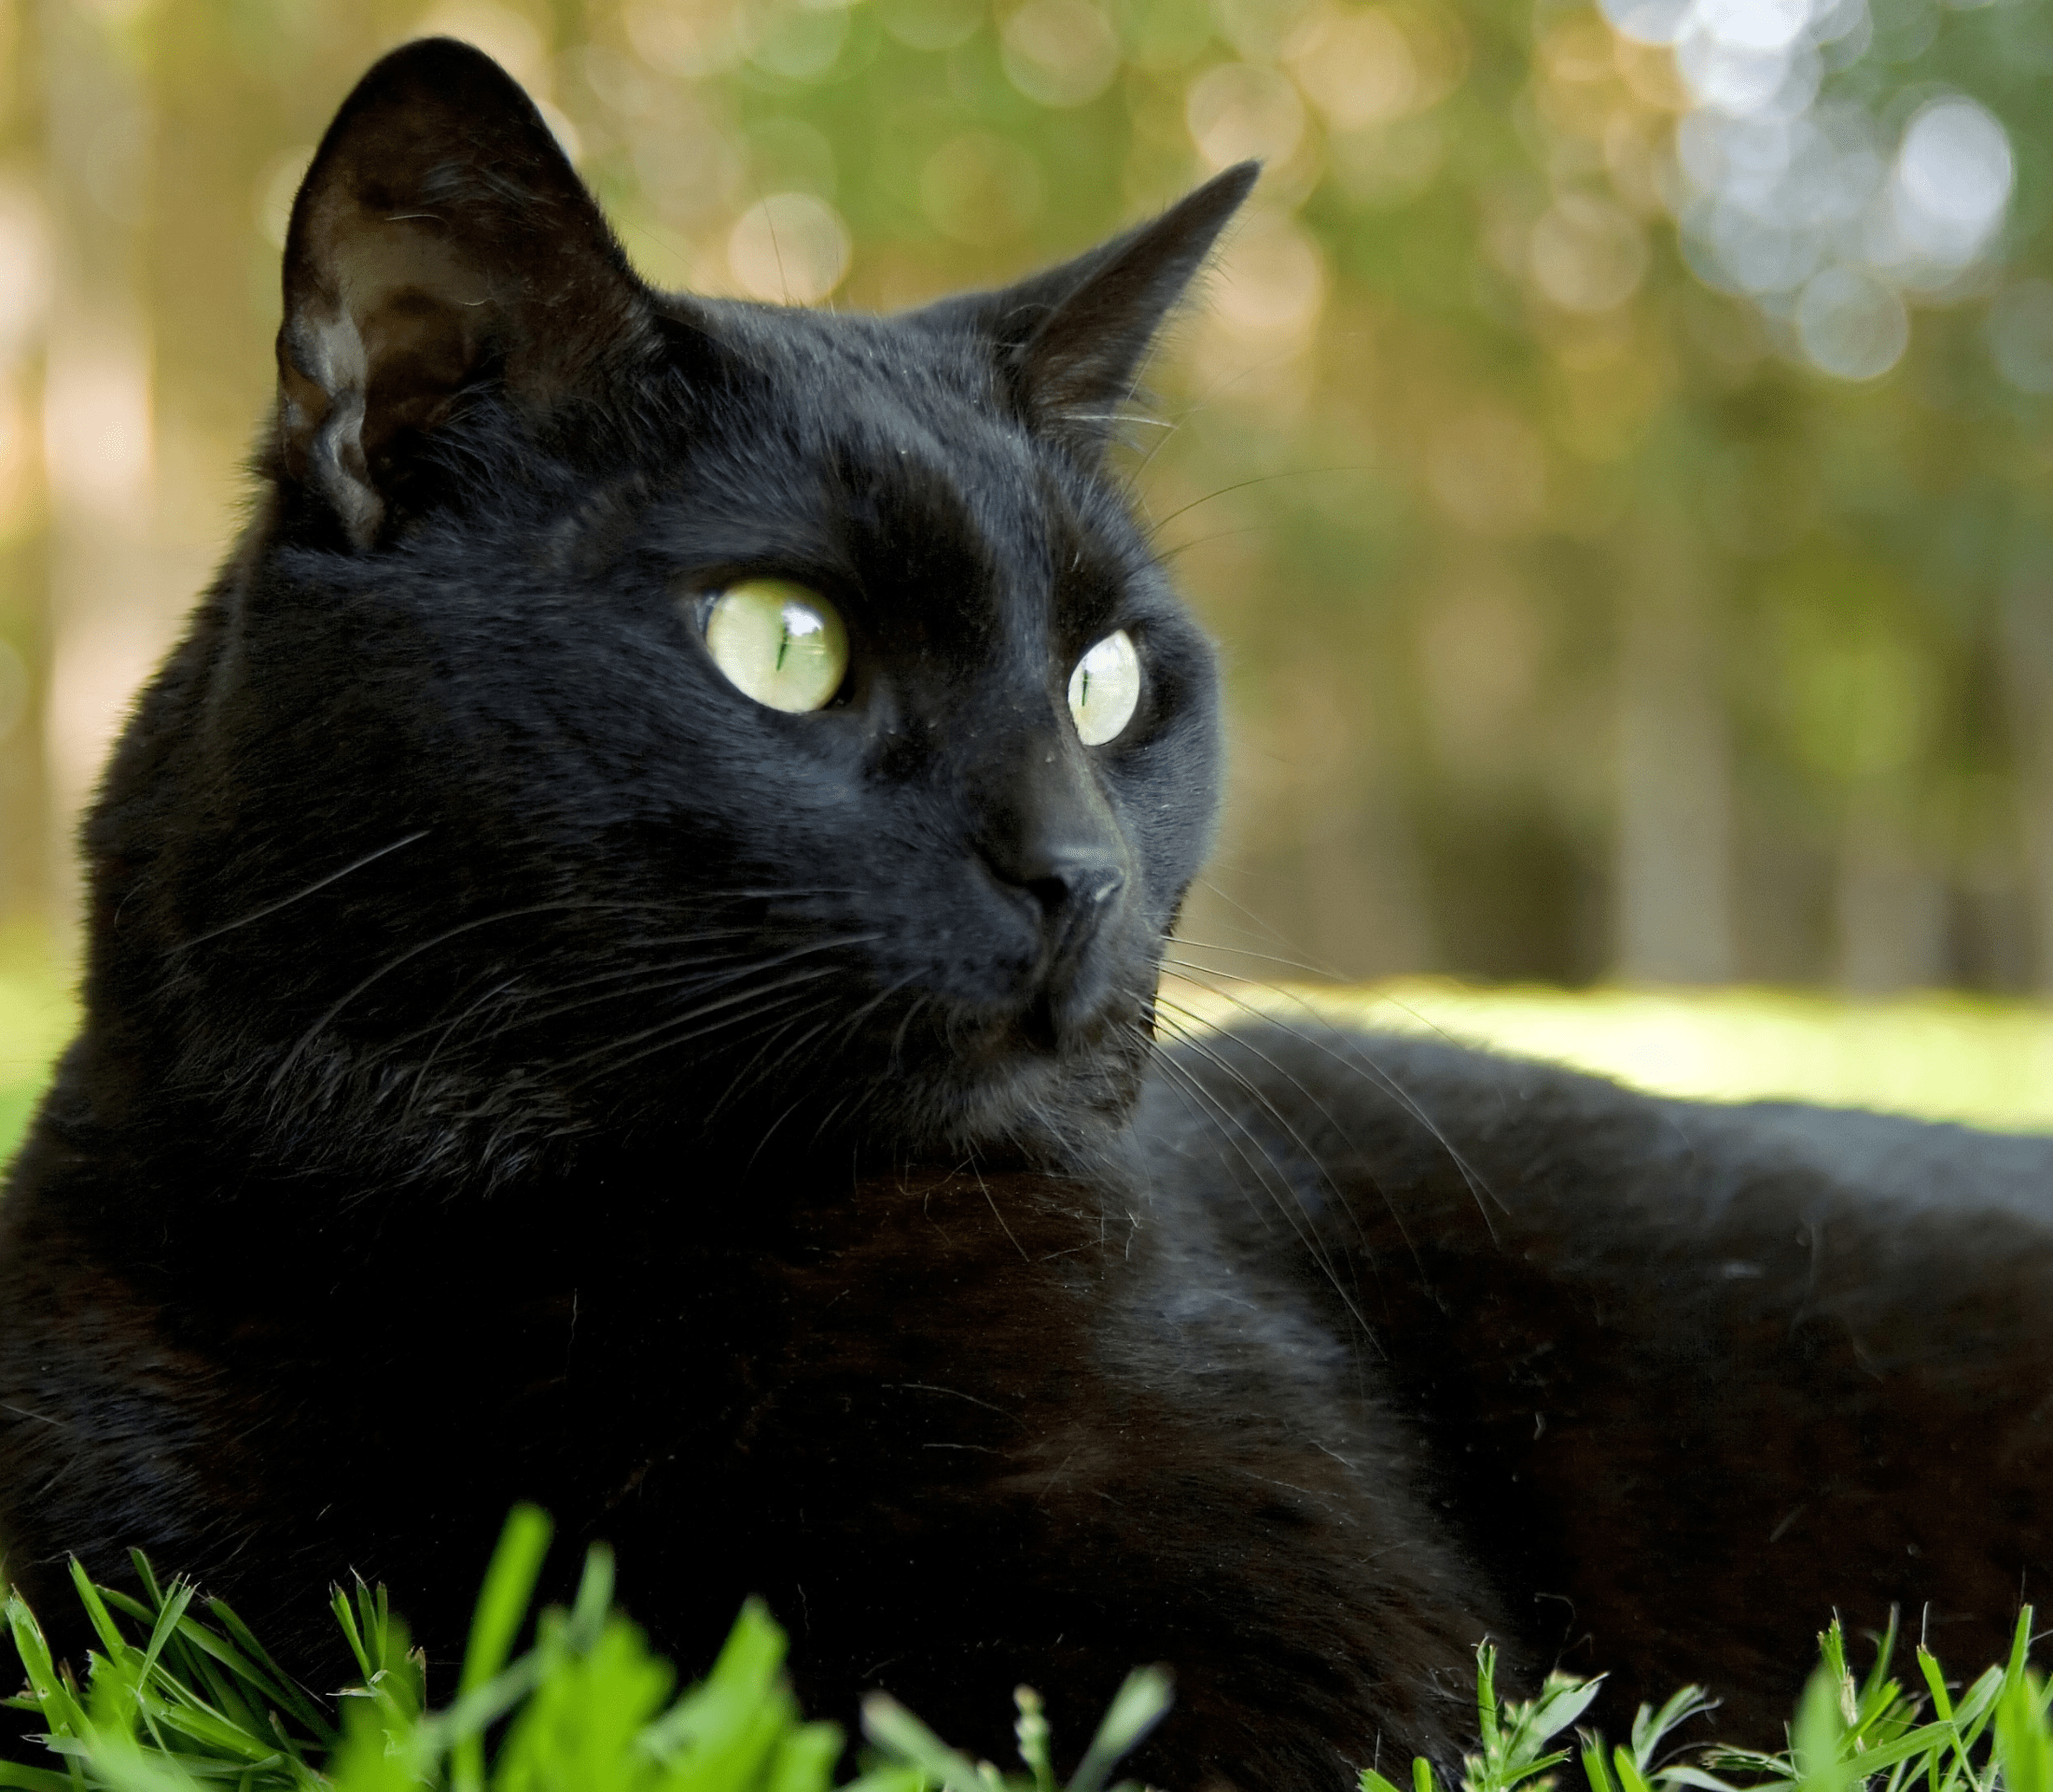 Black cat on the grass facing to the right